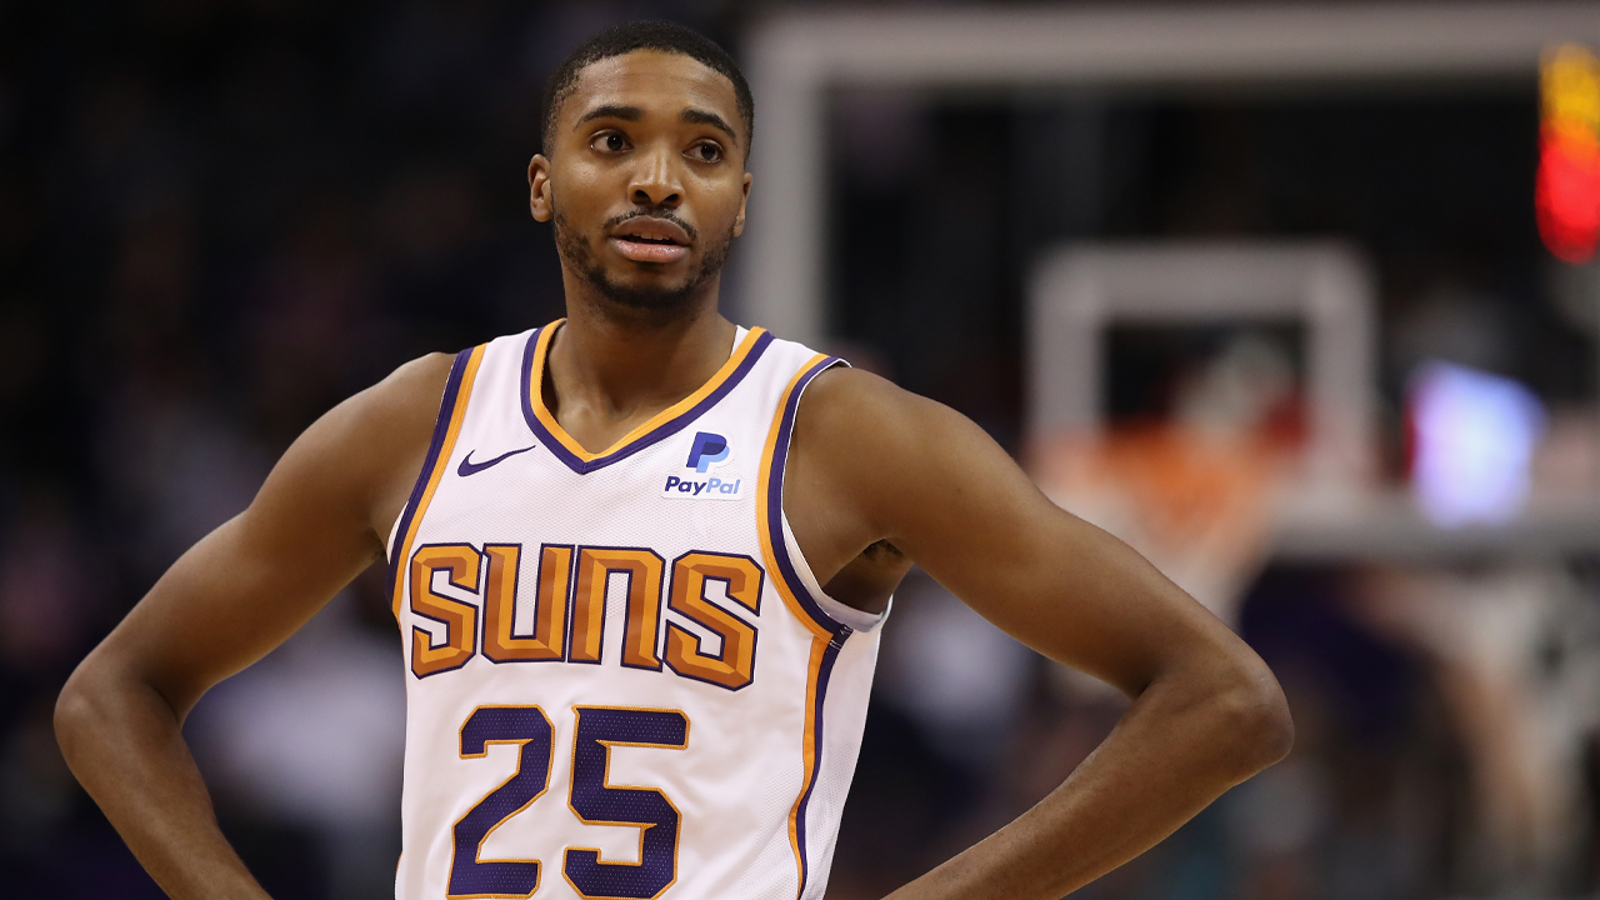 NBA Bubble was like the NCAA Tournament 'win or go home' for the Suns